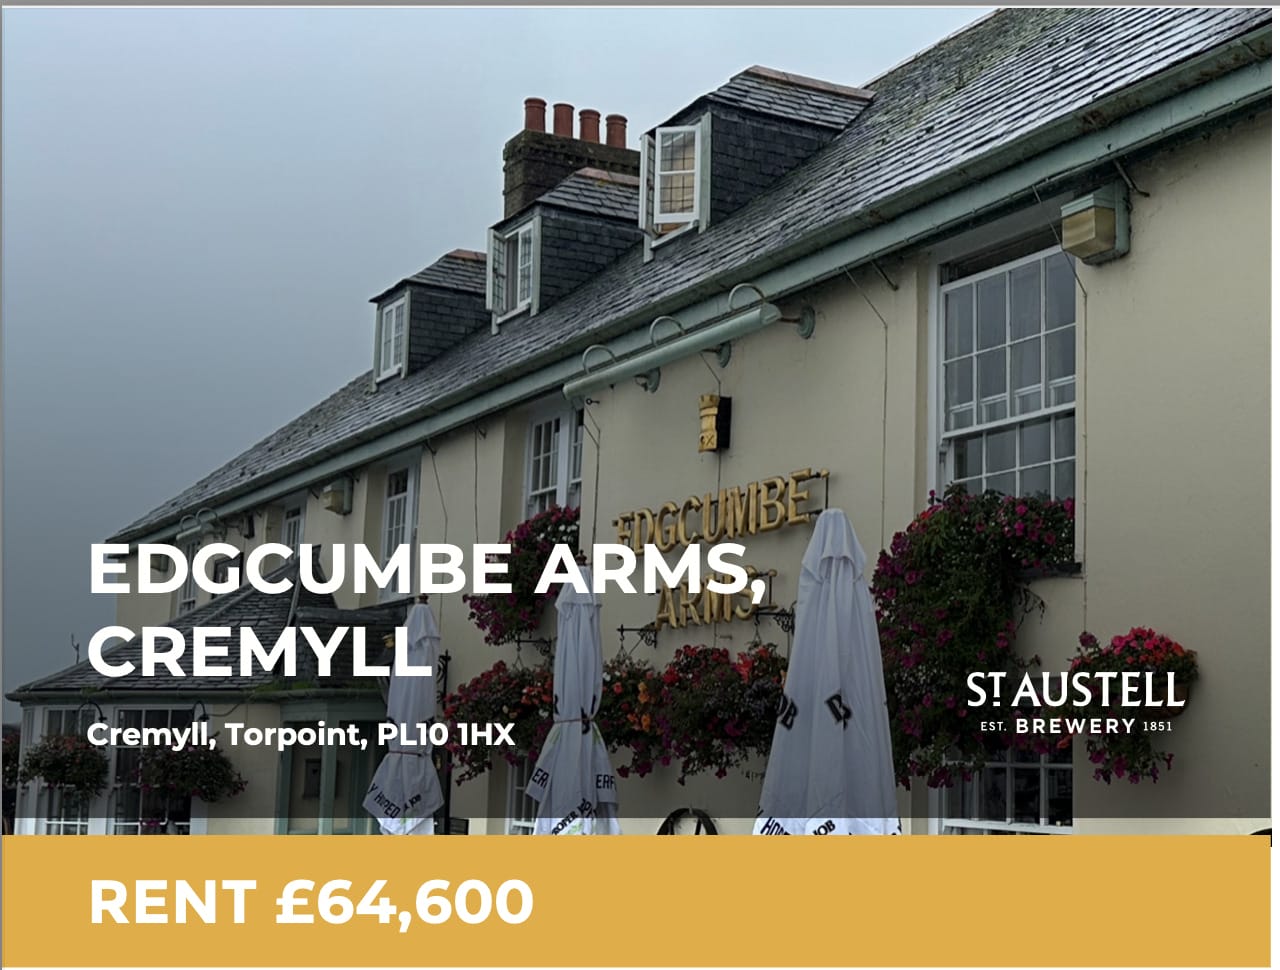 Lease A Pub In Cremyll - The Edgcumbe Arms Is Available !